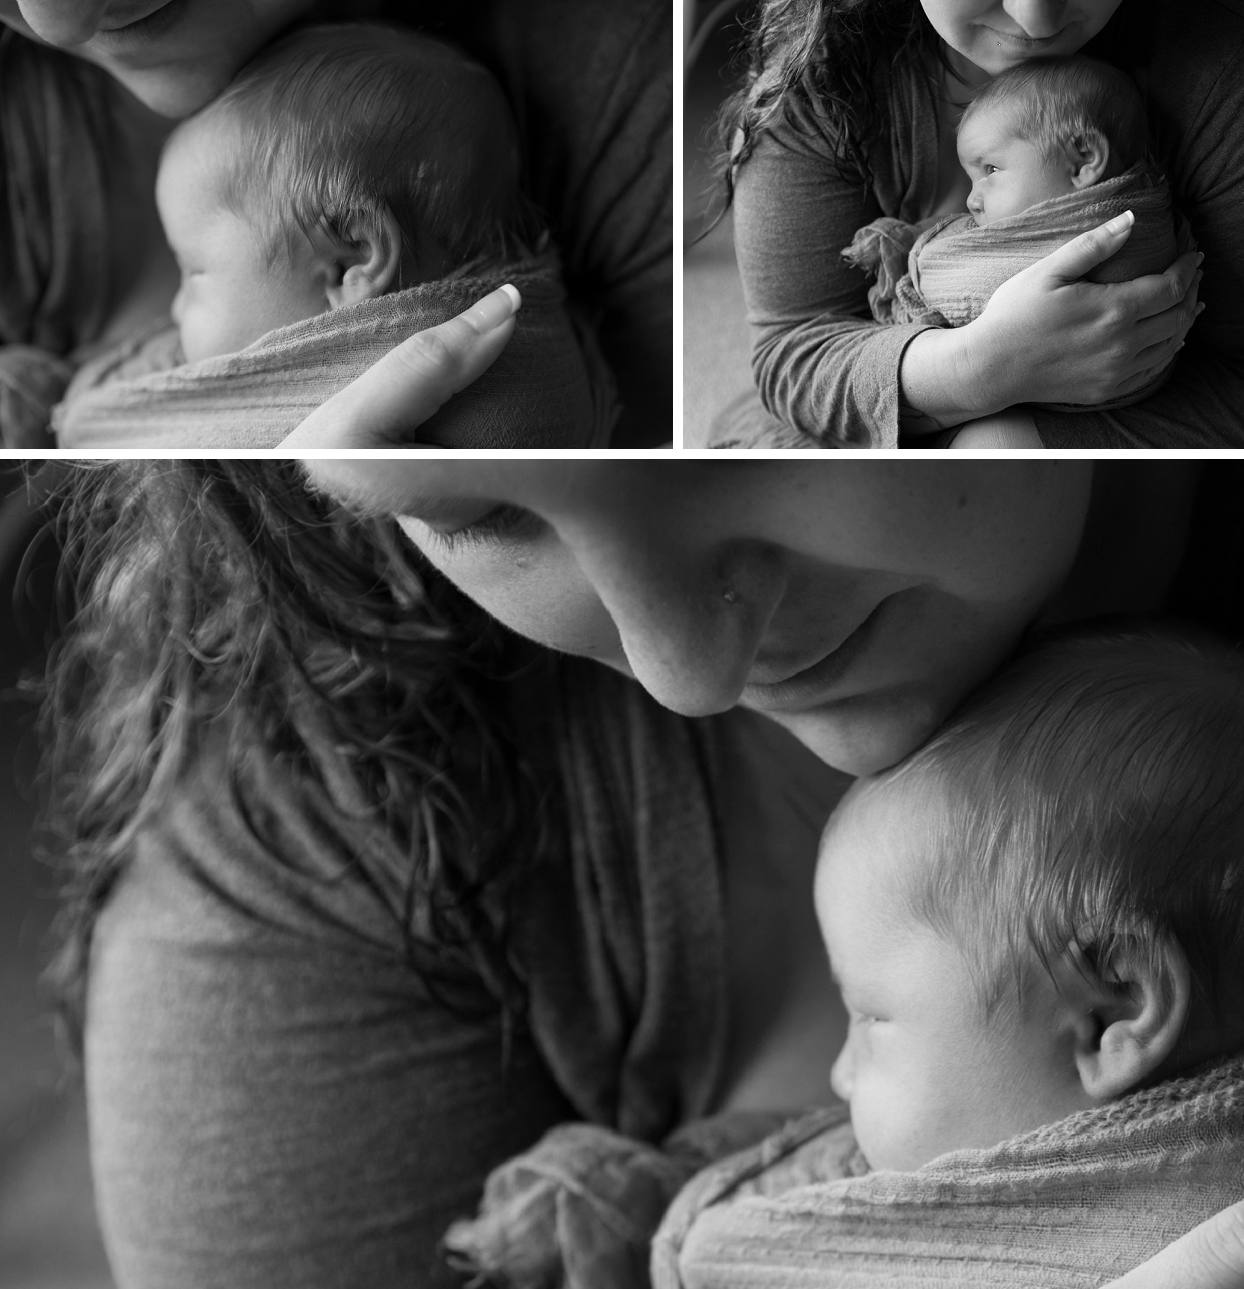 Black and white images of mother and baby